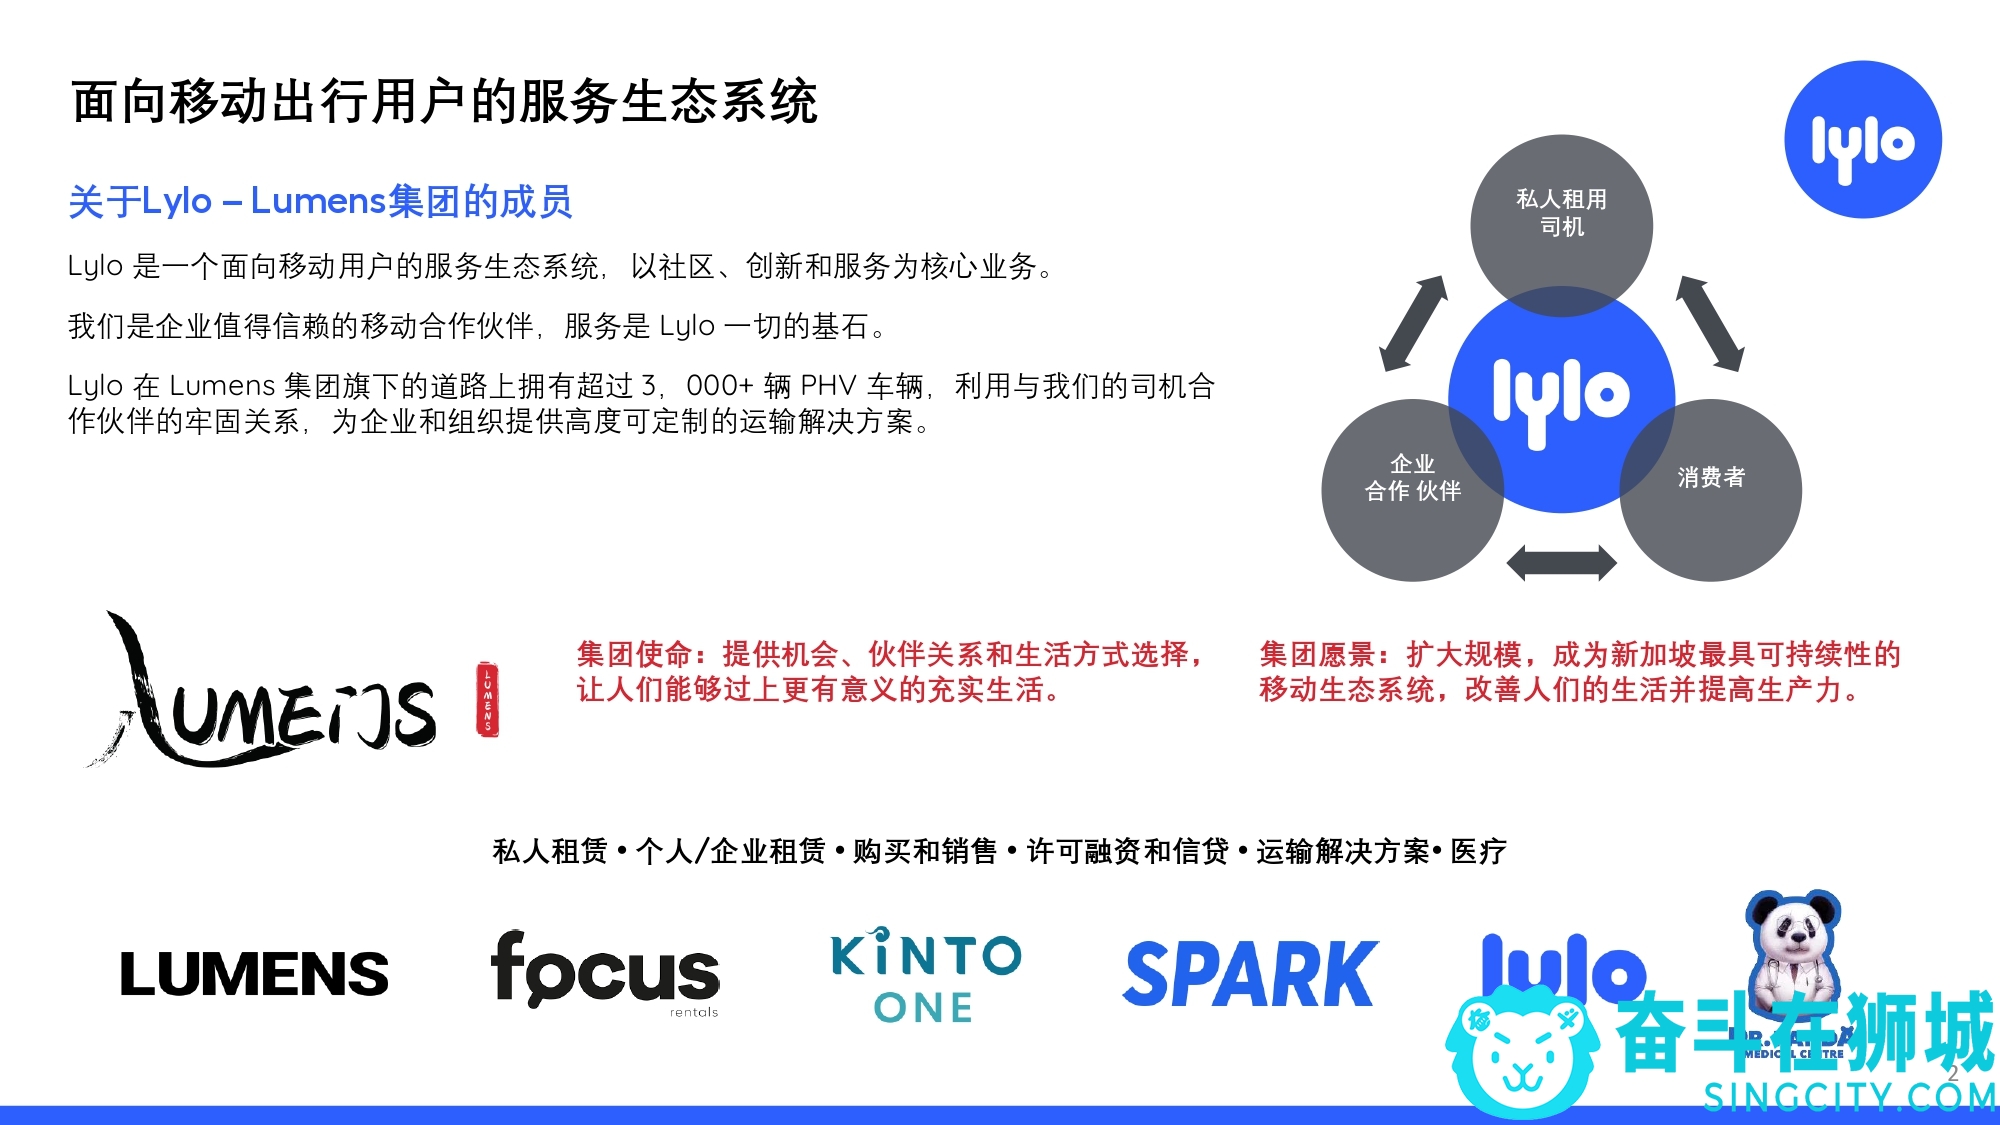 Lylo Introductory Deck v1.2 Chinese version_page-0002.jpg